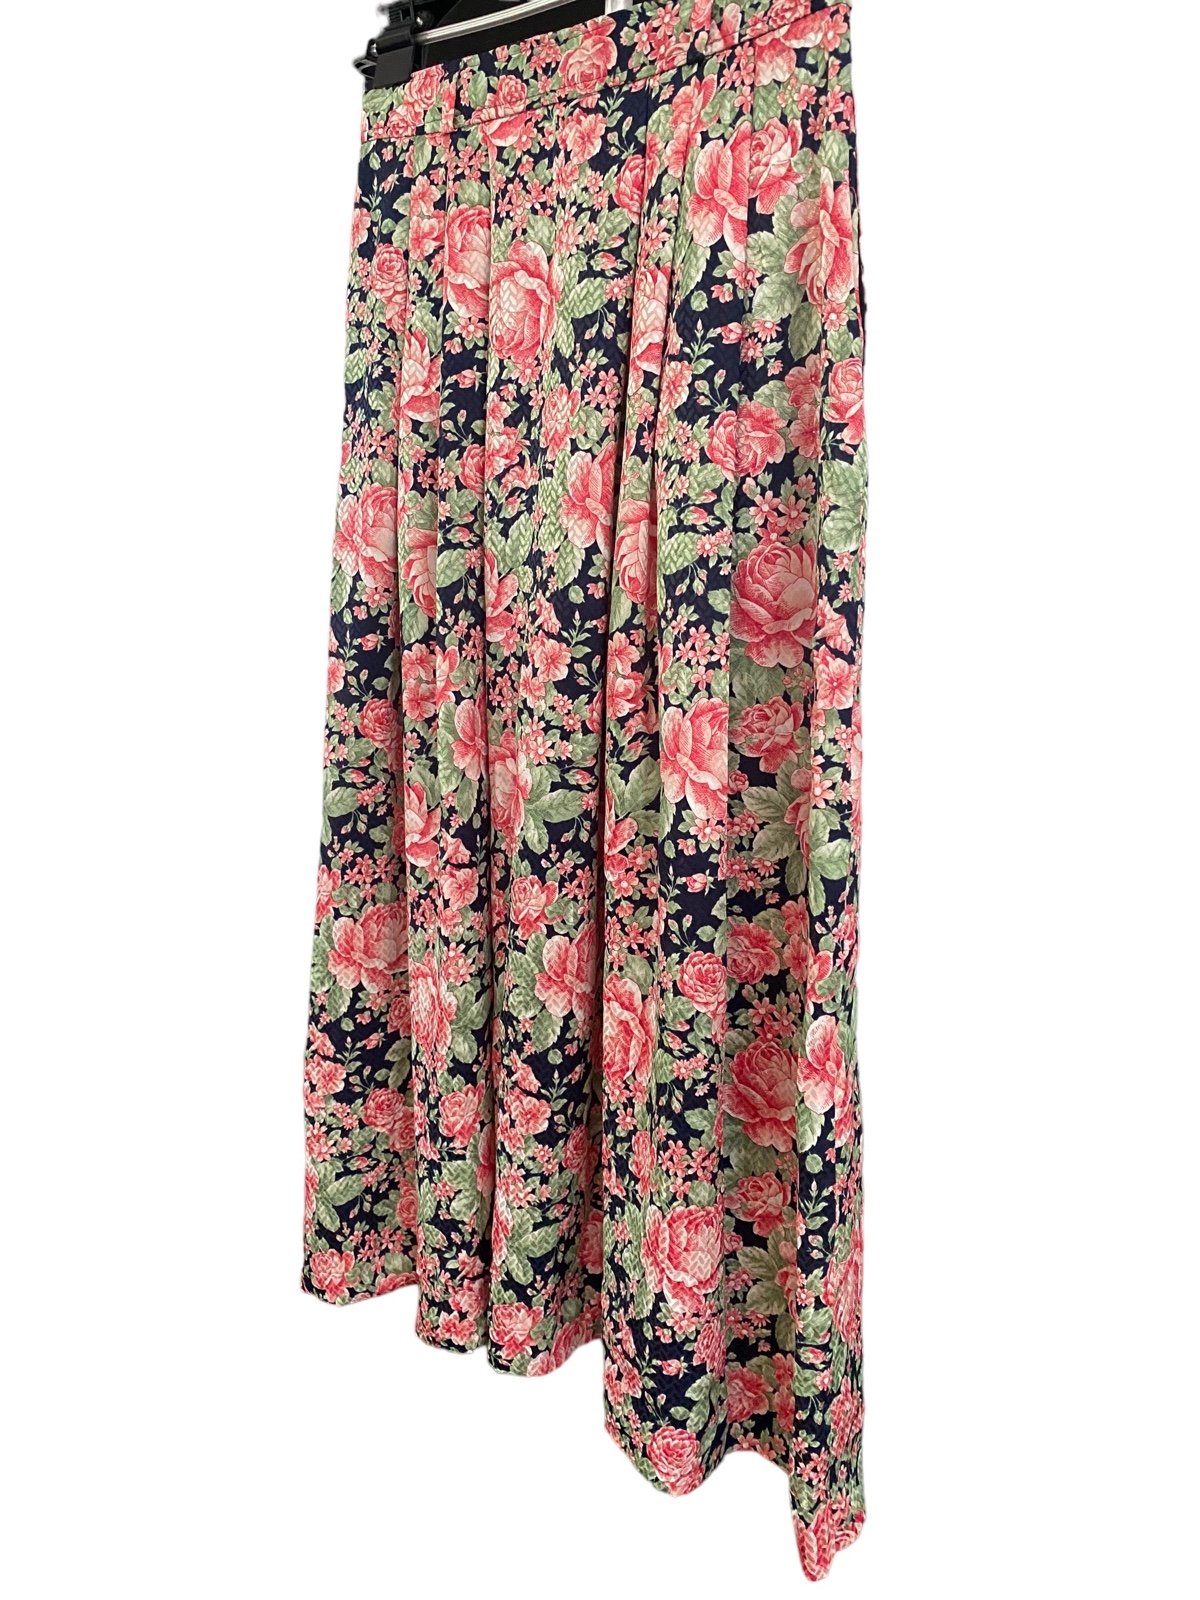 Beautiful Evan-Picone Multi Color Floral Pleated Skirt Size 12 p2mKnLJUU Buying Cheap